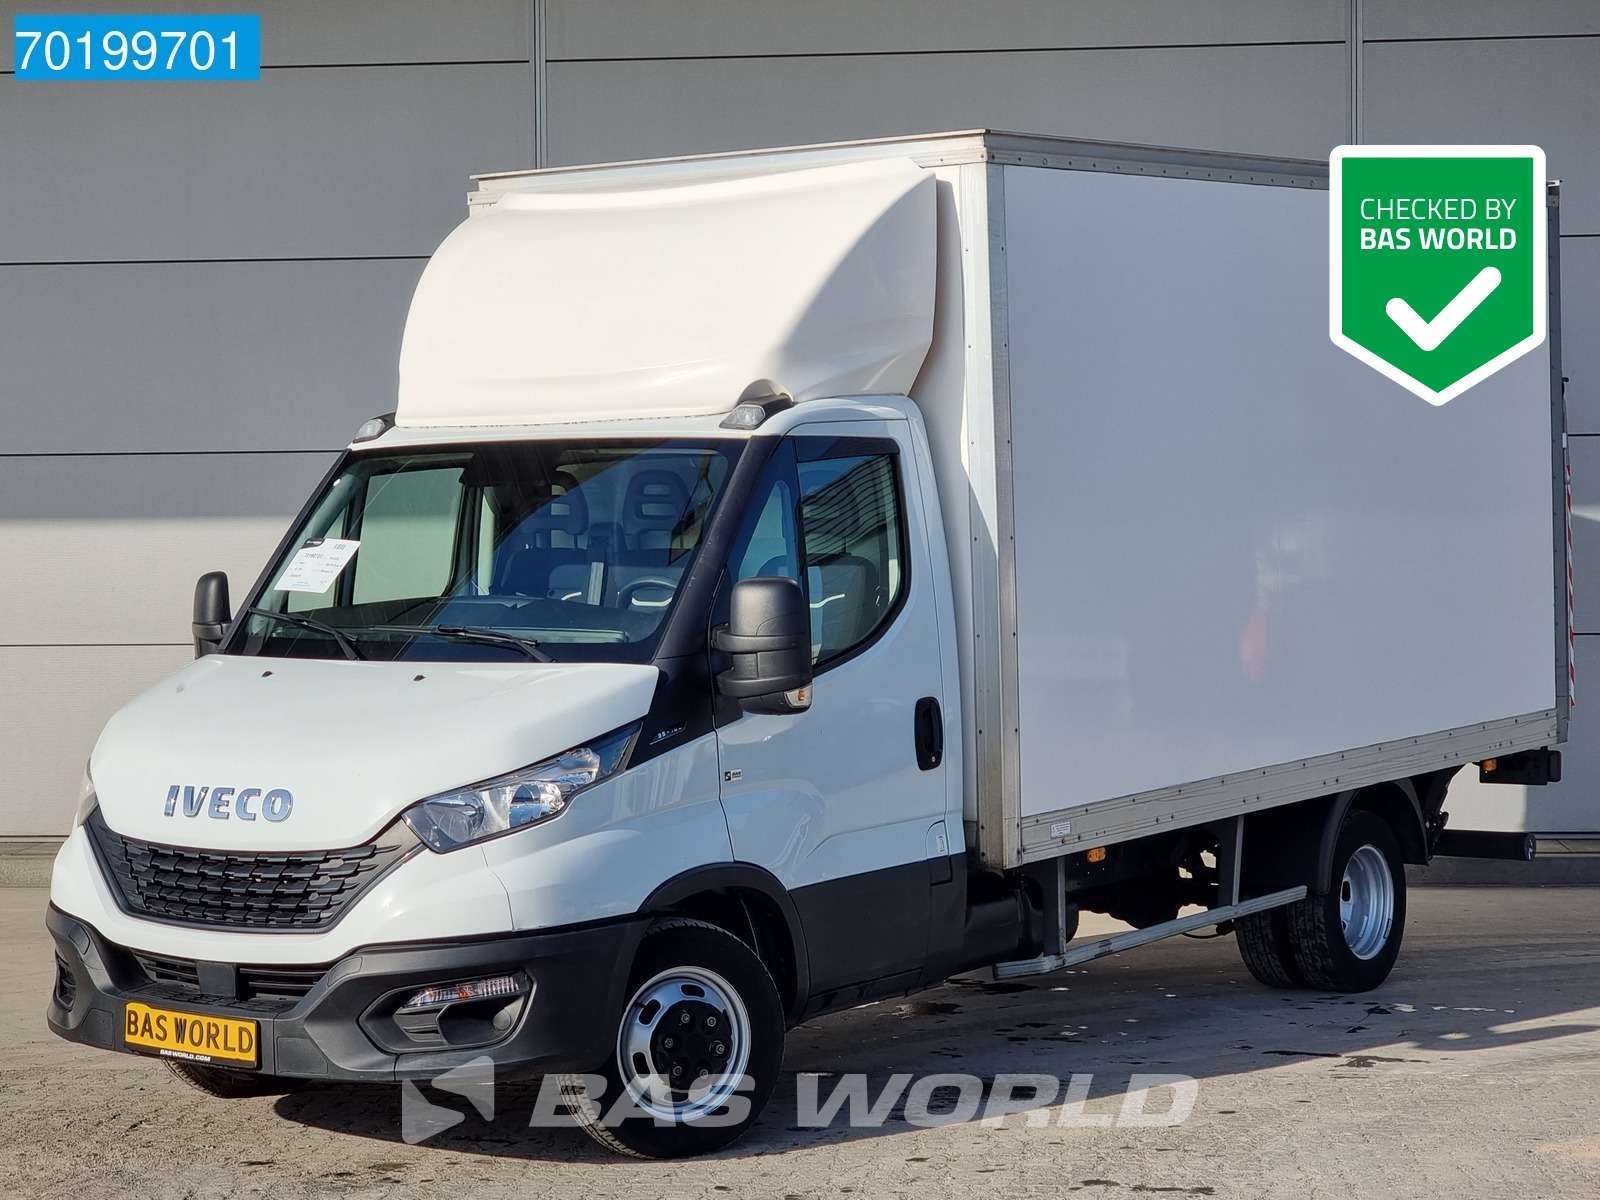 Iveco Daily Transporter in White used in VEGHEL for € 38,418.-